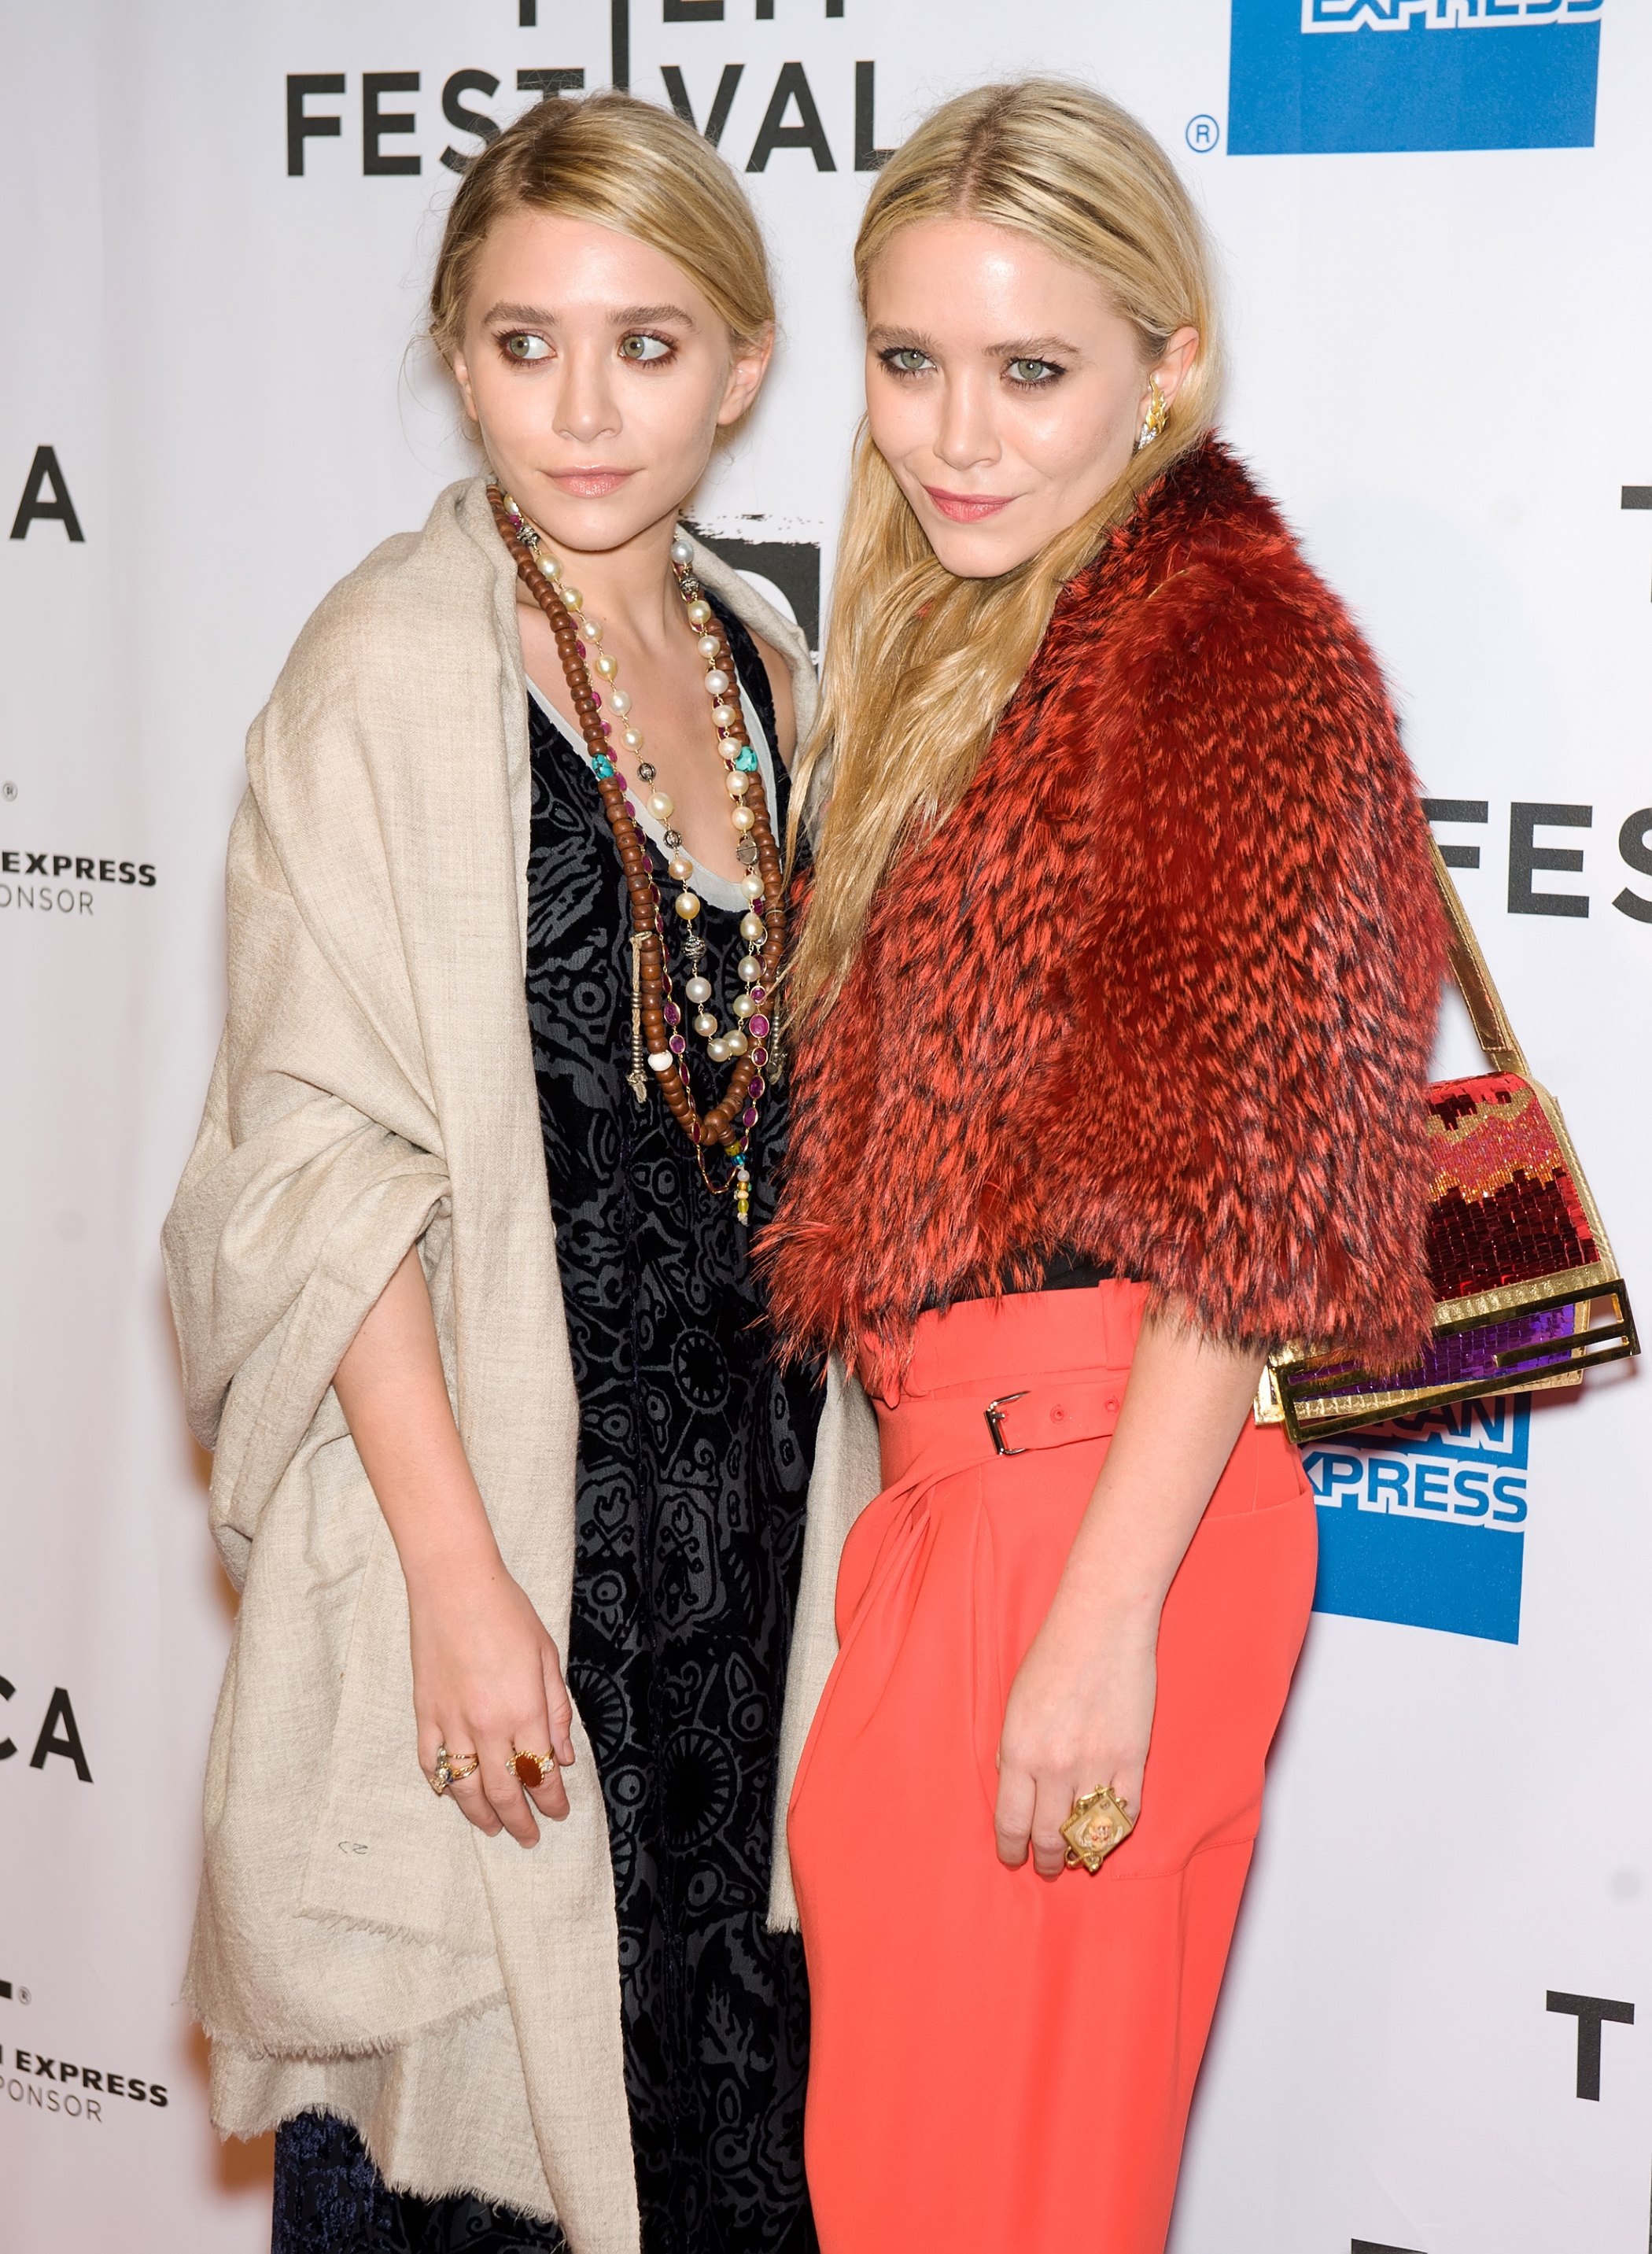 Mary-Kate Olsen Is Now the Tan Twin — She’s Bizarrely Bronzed | Life ...